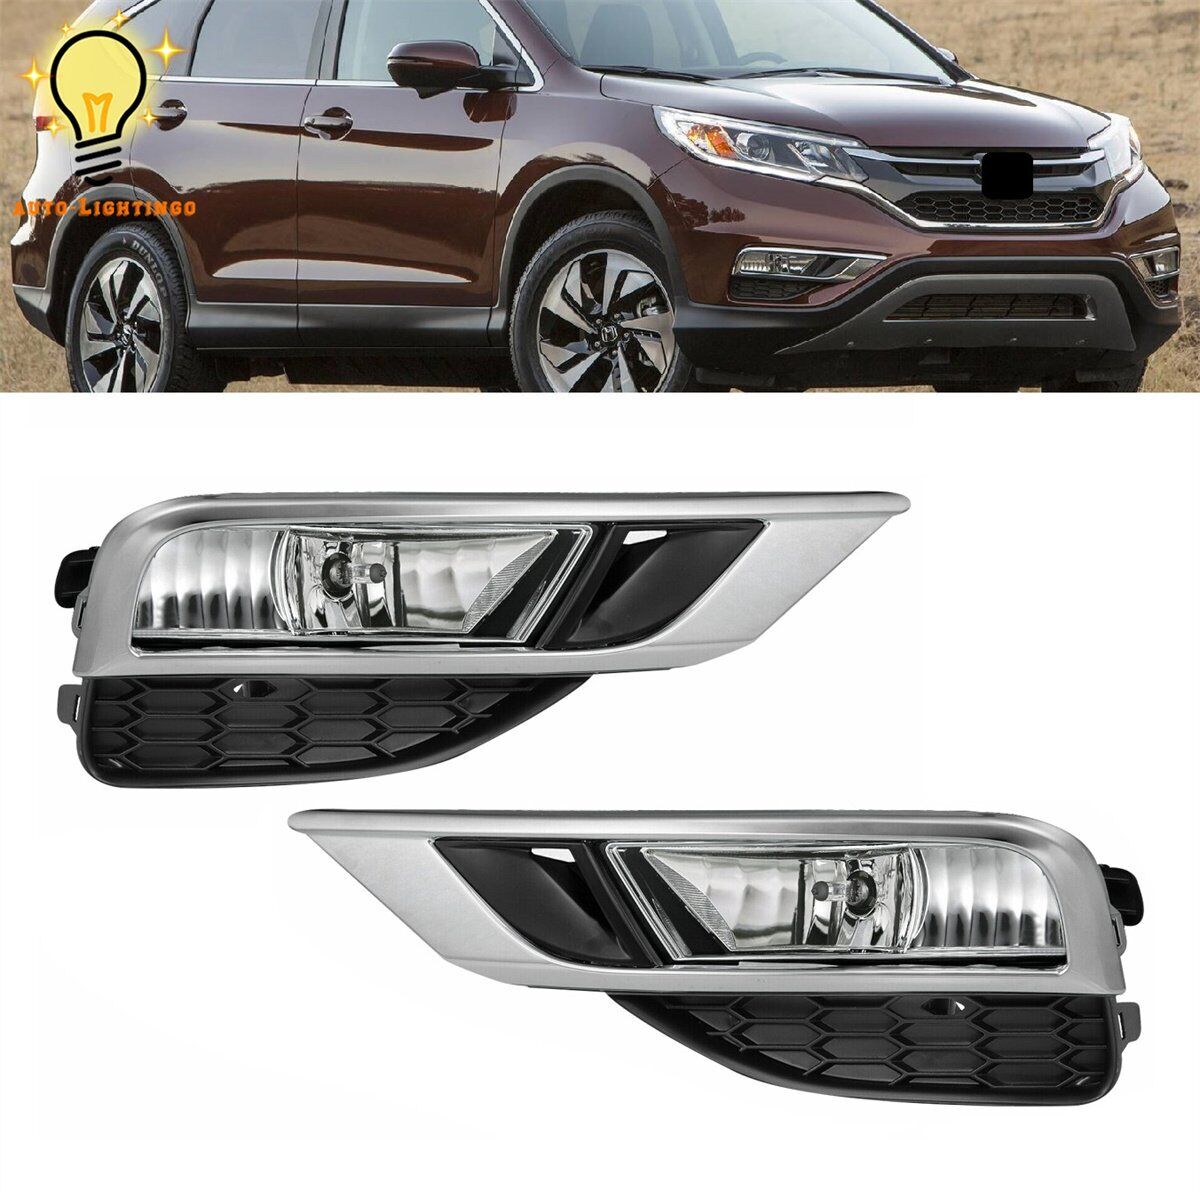 Pair of Bumper Fog Lights Lamps w/Cover Switch Kits For 2015 2016 Honda CRV